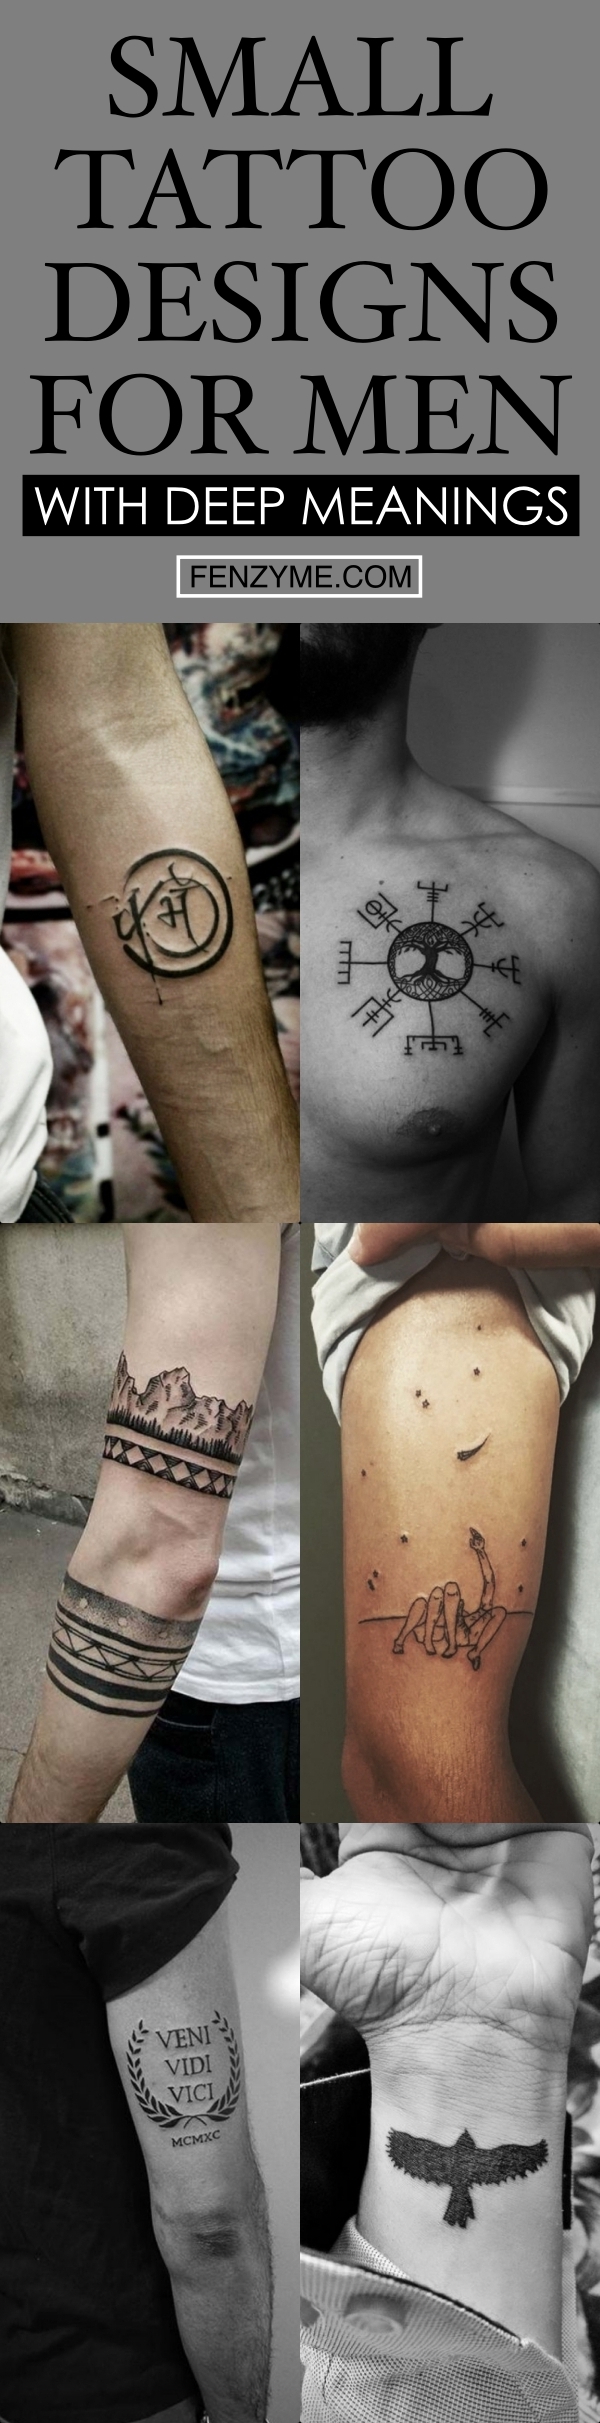 55 Small Tattoo Designs for Men with Deep Meanings - Page 3 of 4 - Fashion  Enzyme